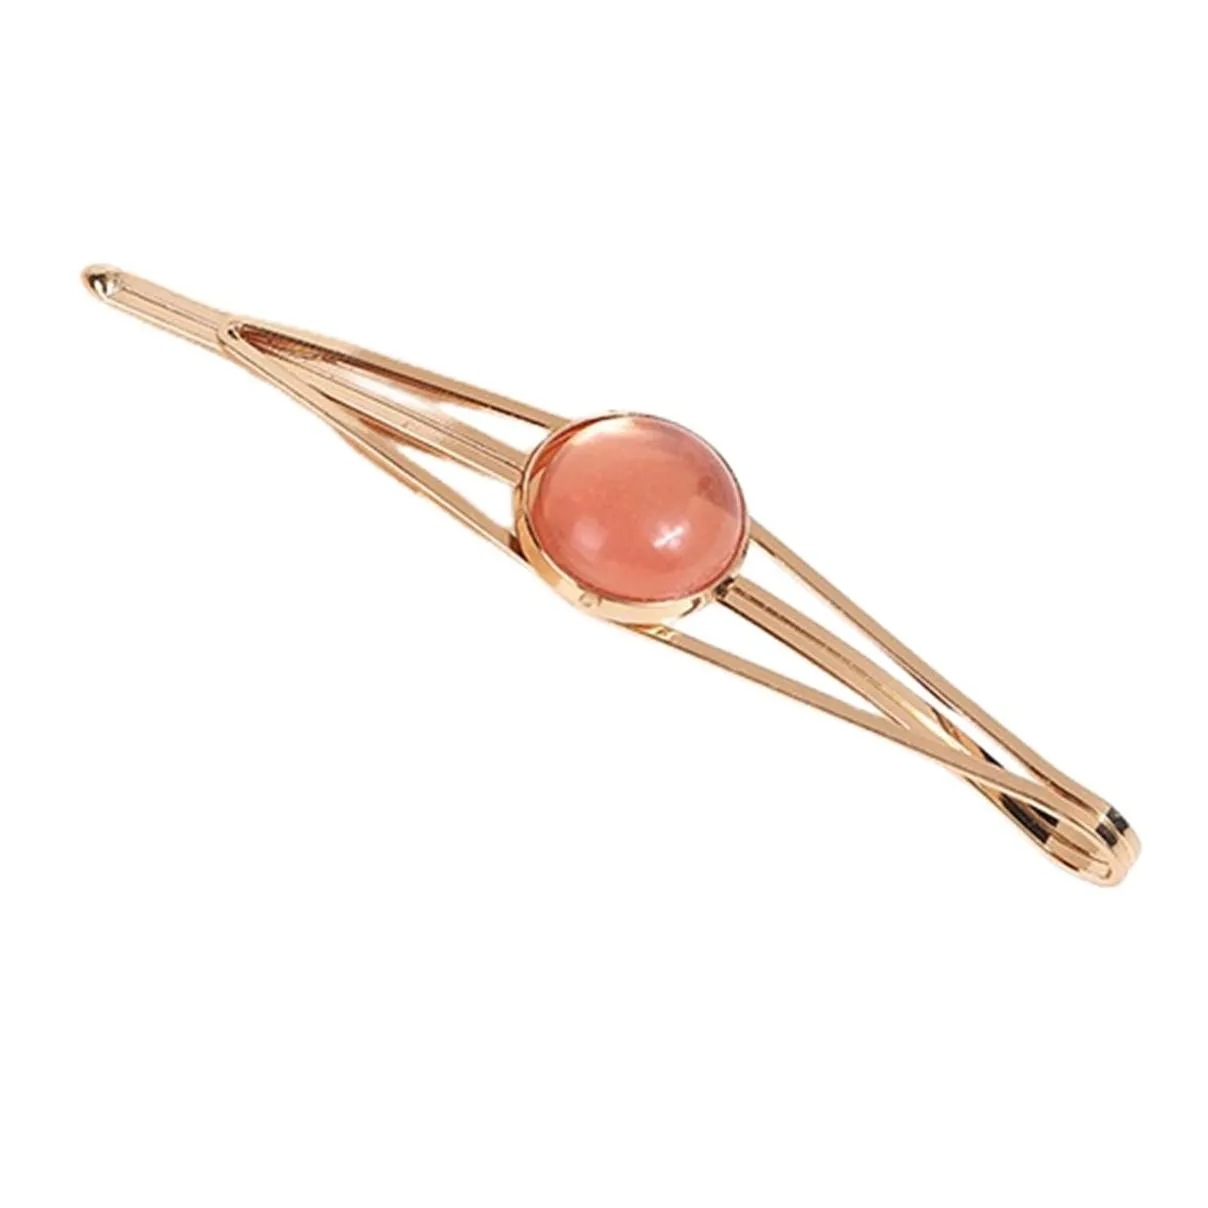 Fashionable Gold Alloy Hair Slide Clips With Colorful Natural Gemstone Beads For Womens